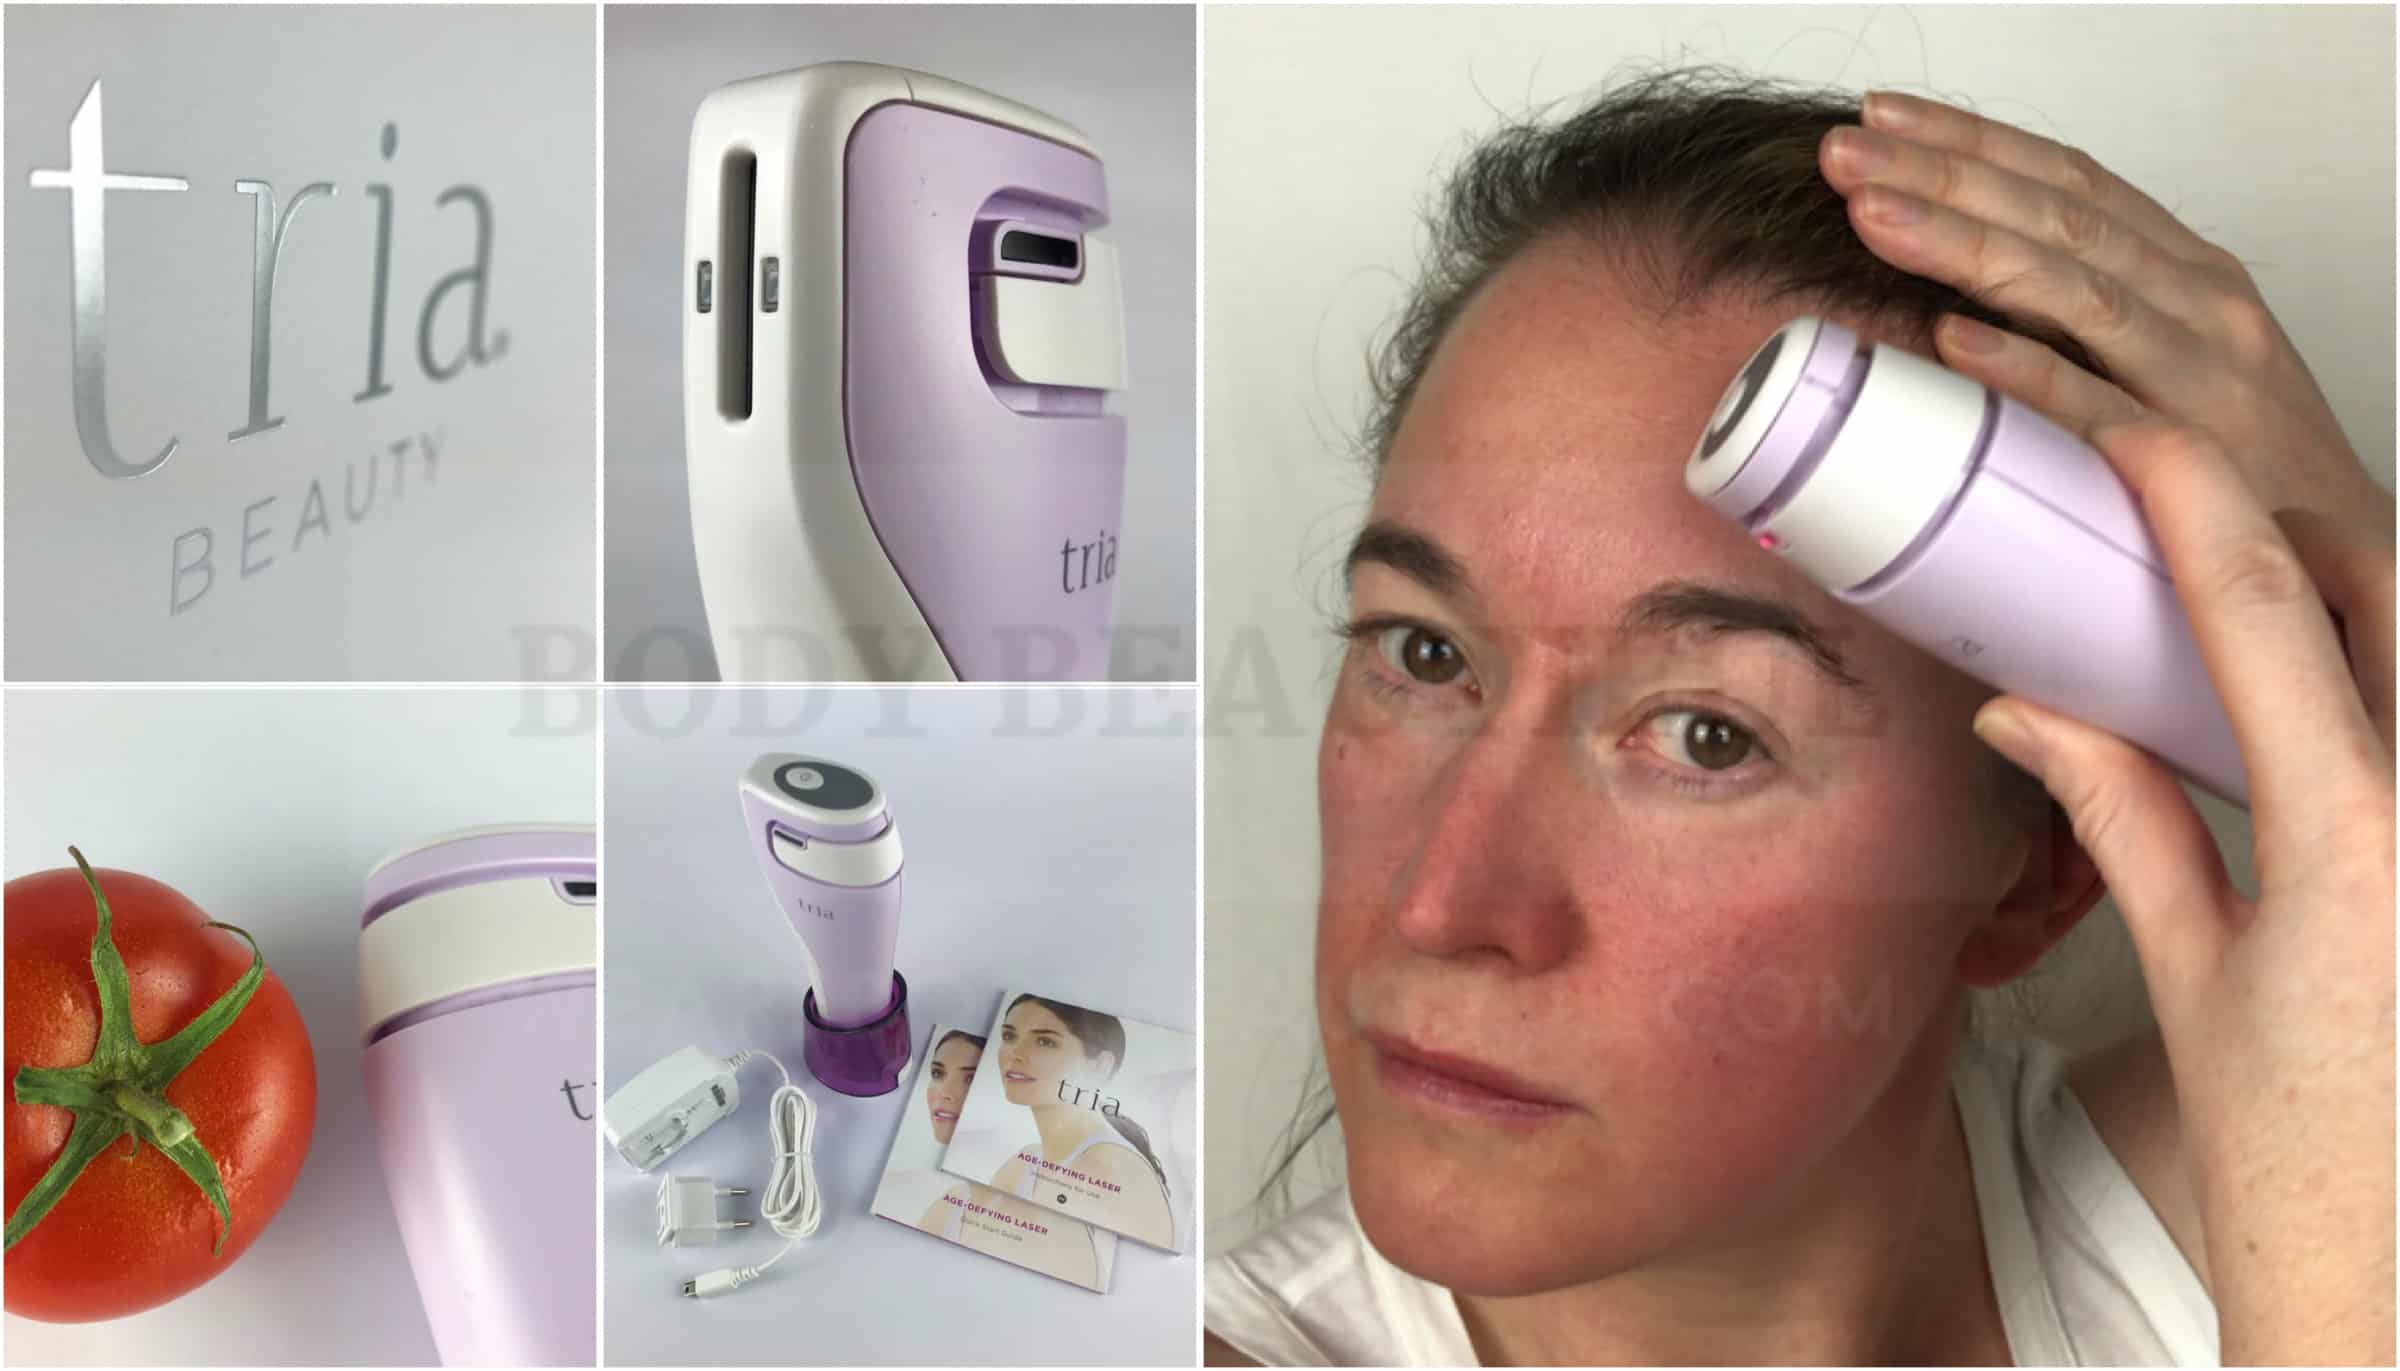 Tried & tested user trial of the Tria Age Defying laser with before & after photos by WeAreBodyBeautiful.com